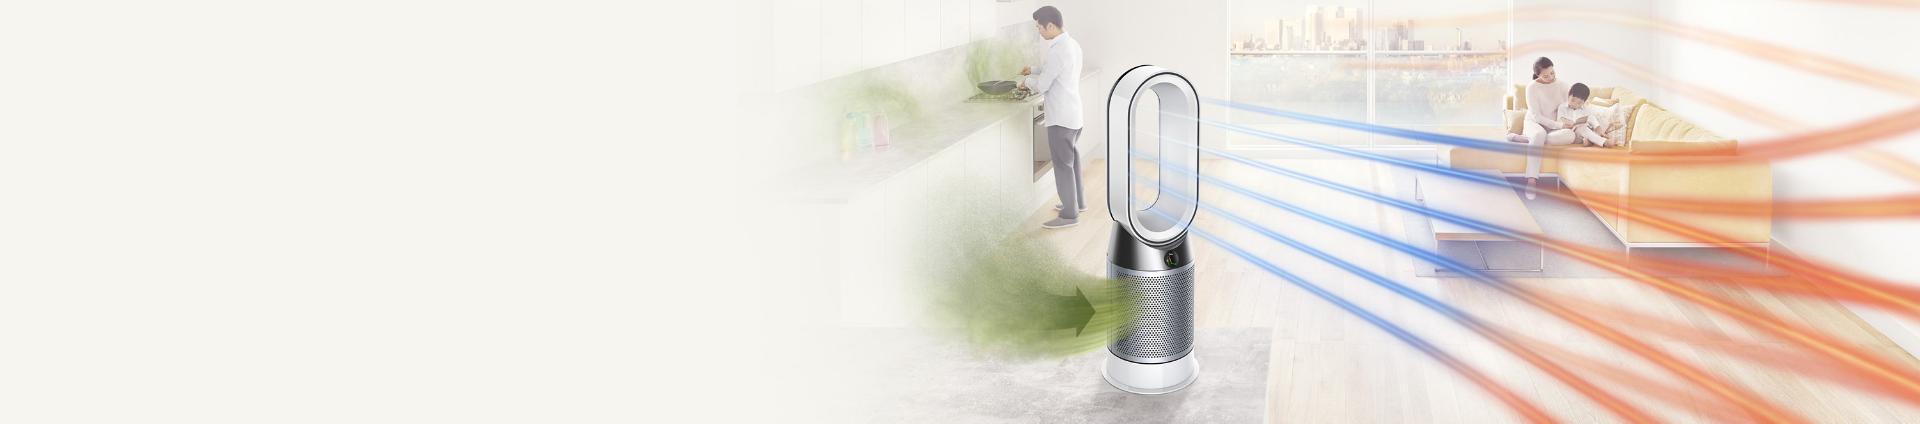 Dyson Pure Hot + Cool